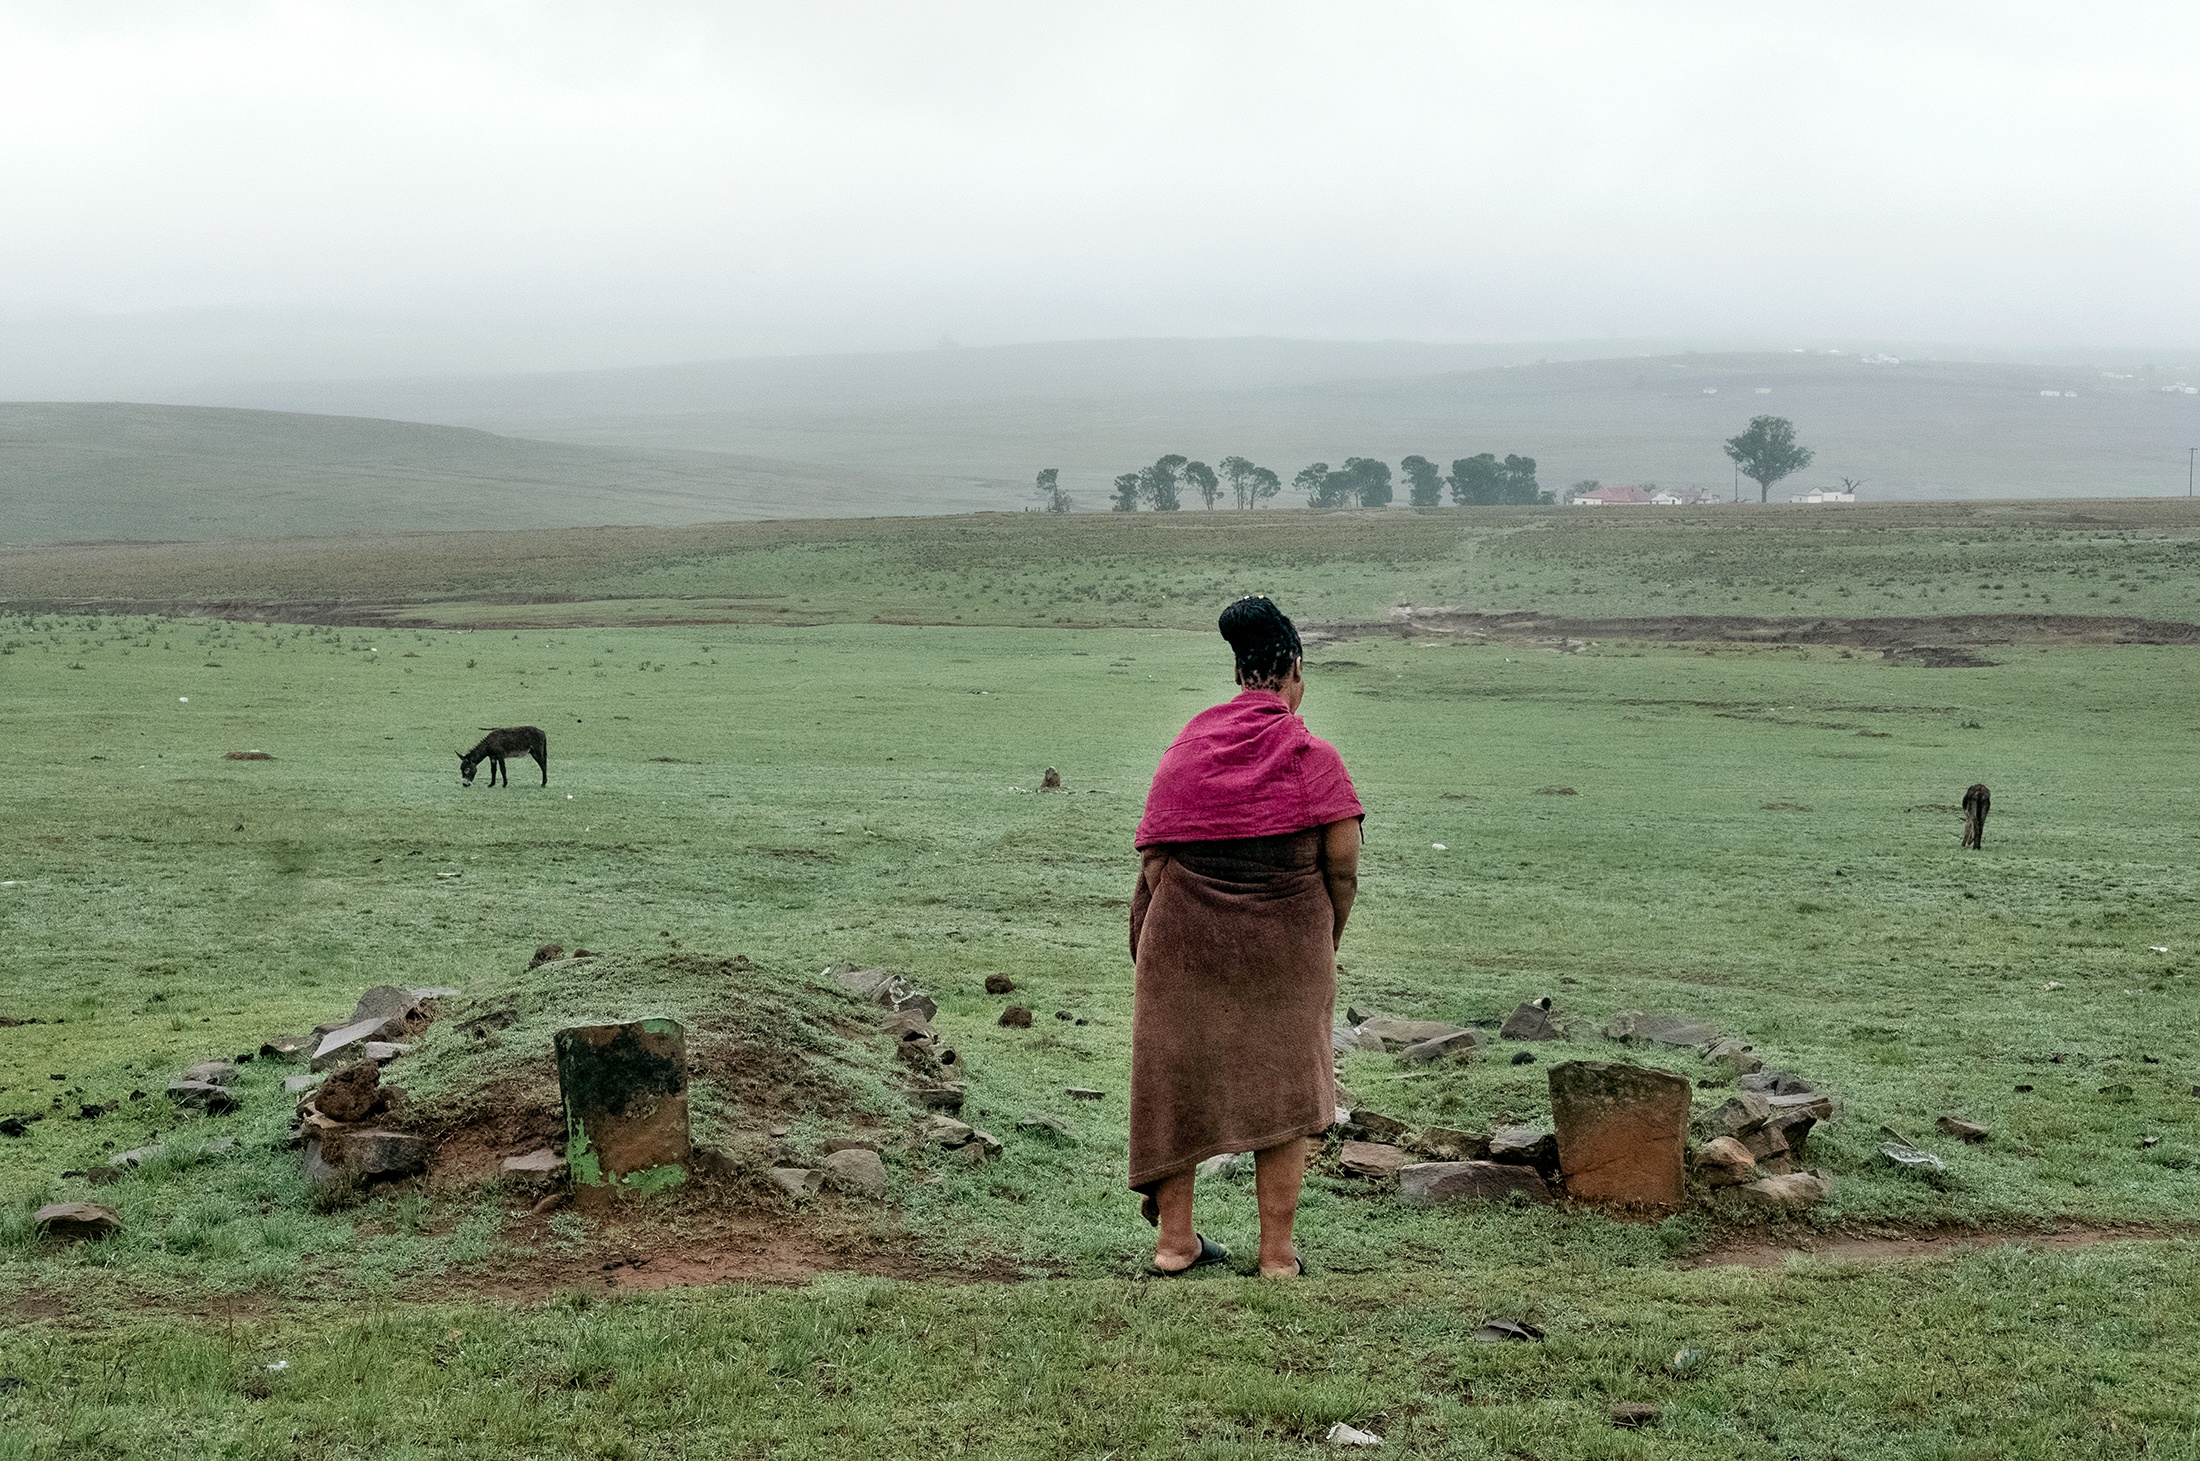 Lindokuhle Sobhekwa's photograph 'My mother visiting our ancestors' shows an individual standing in front of two graves with headstones in grassy plain.
